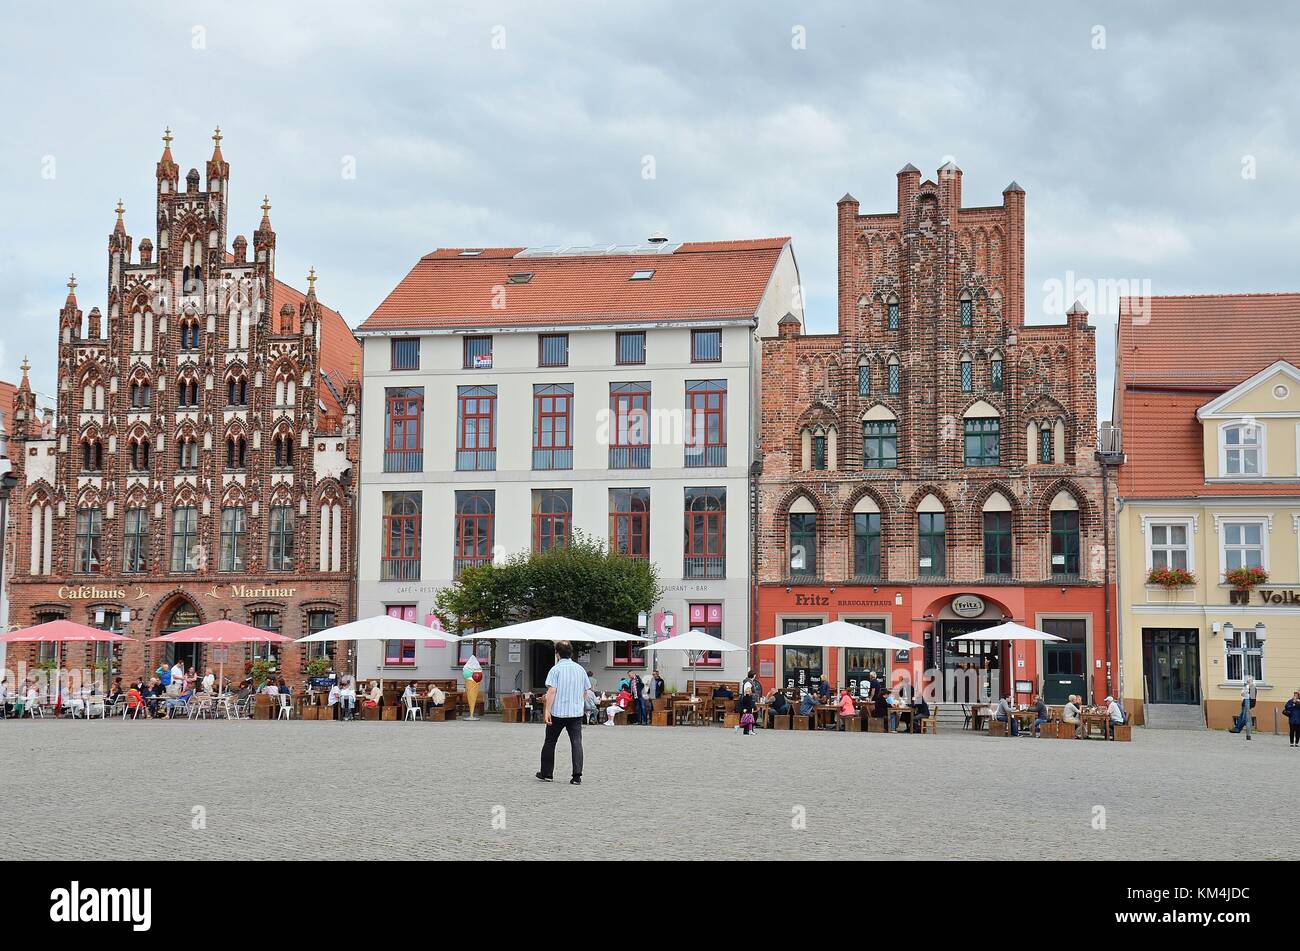 Medieval town of Greifswald (Mecklenburg-Vorpommern, Germany): A view of the Market Square Stock Photo